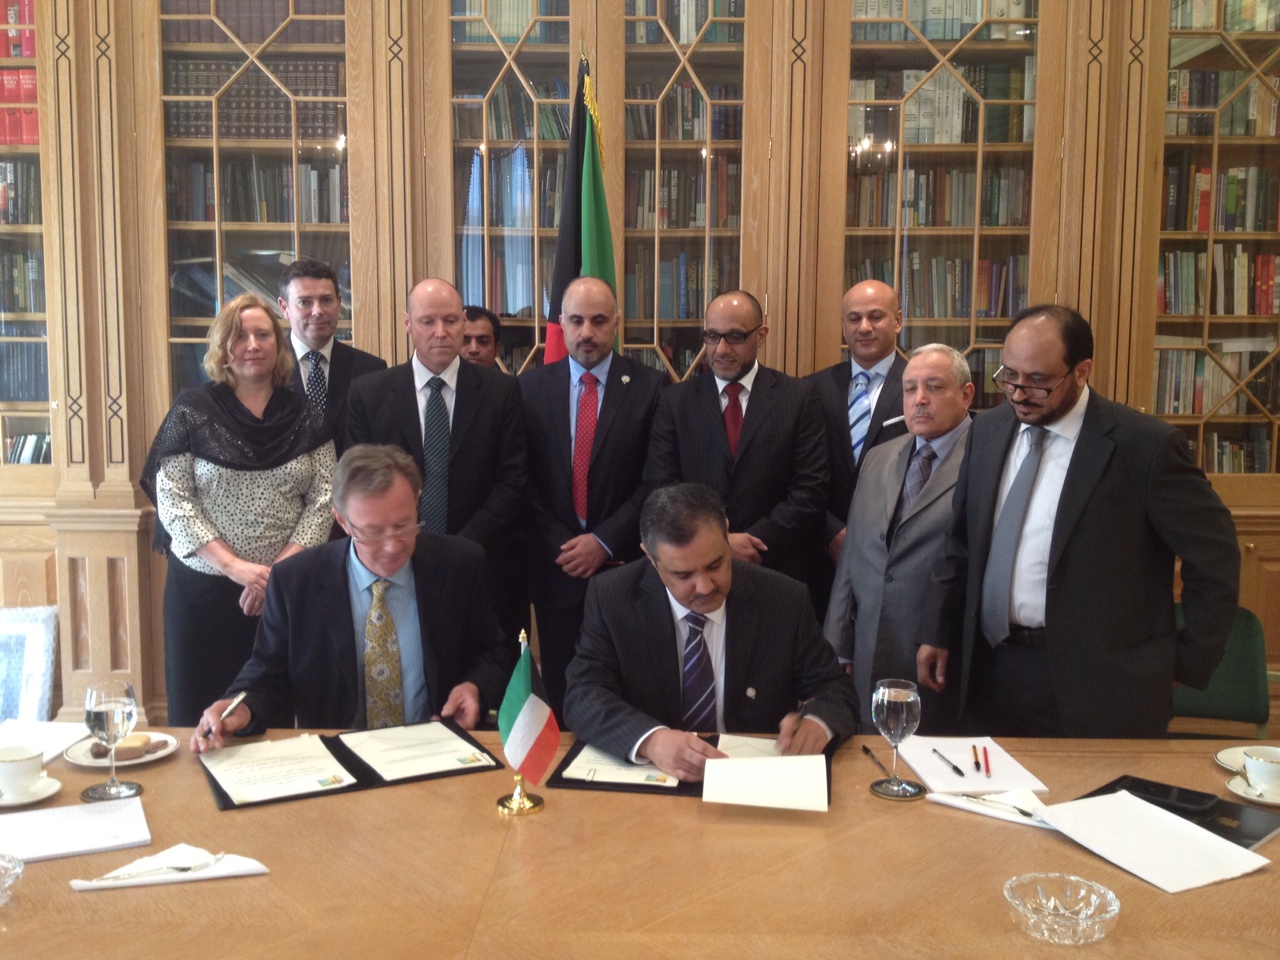  Director General of Kuwait's Public Authority for Environment, Dr. Saleh Al-Mudhi and the Chief Executive of the UK  (CEFAS), Dr. Mike Waldock while signing the agreement 